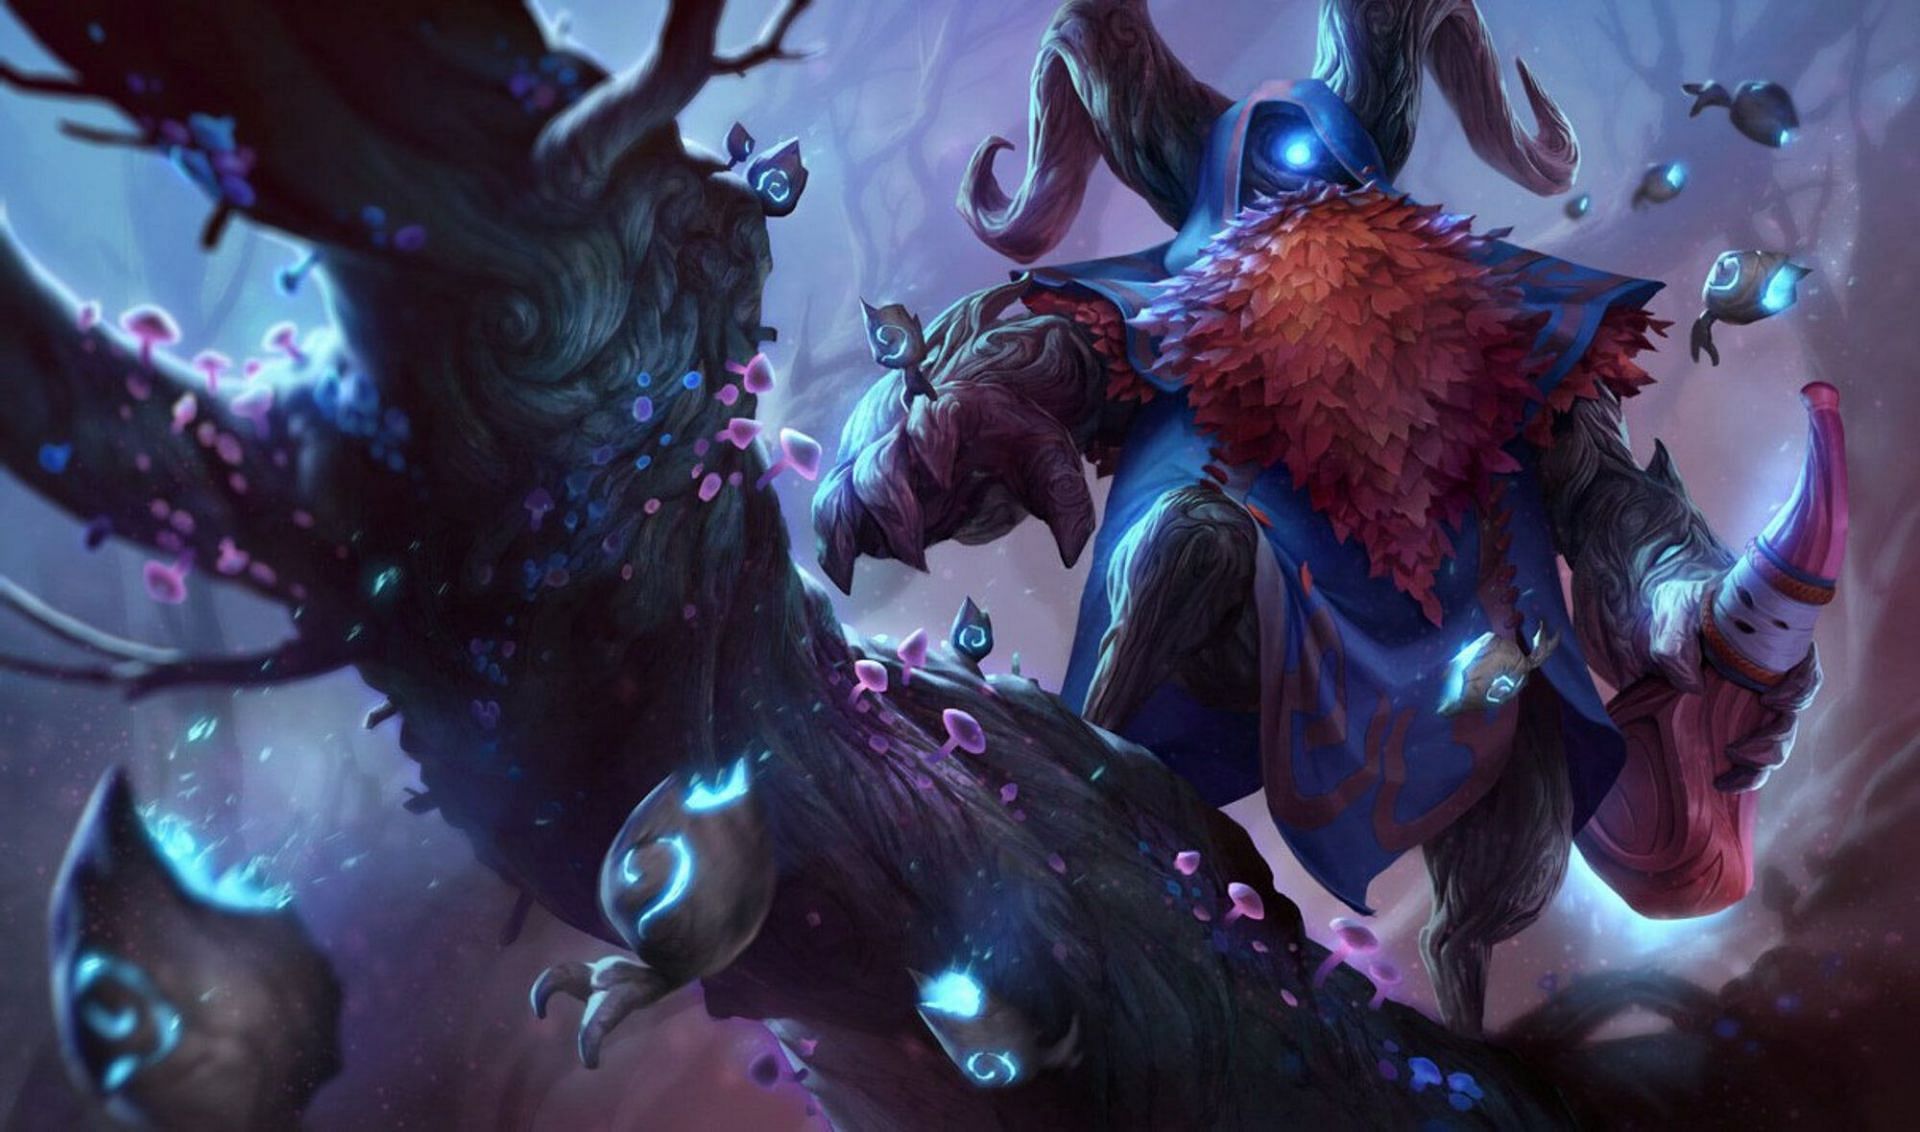 10 strongest League of Legends champions according to Runeterra lore